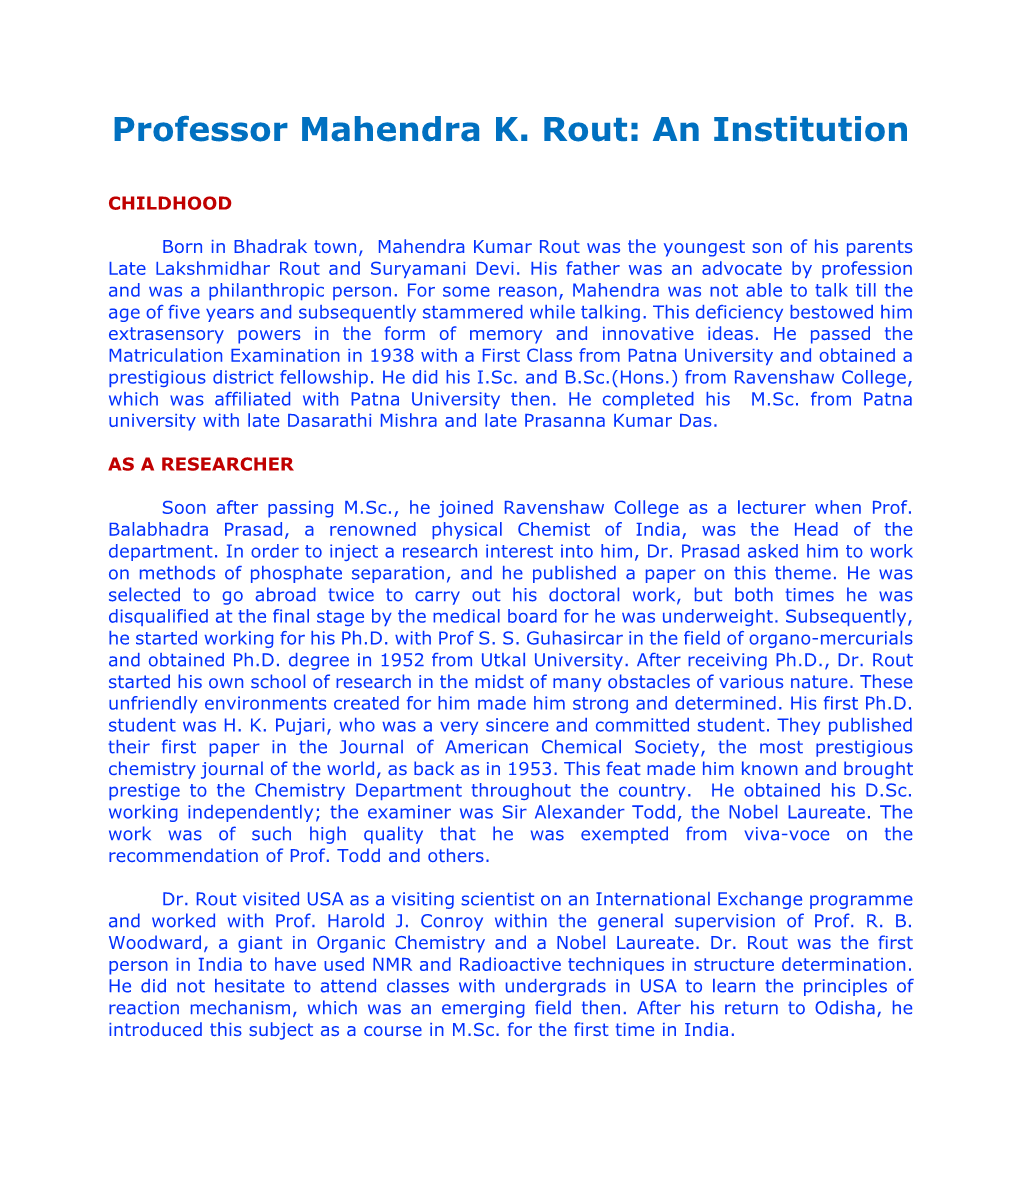 Professor Mahendra K. Rout: an Institution